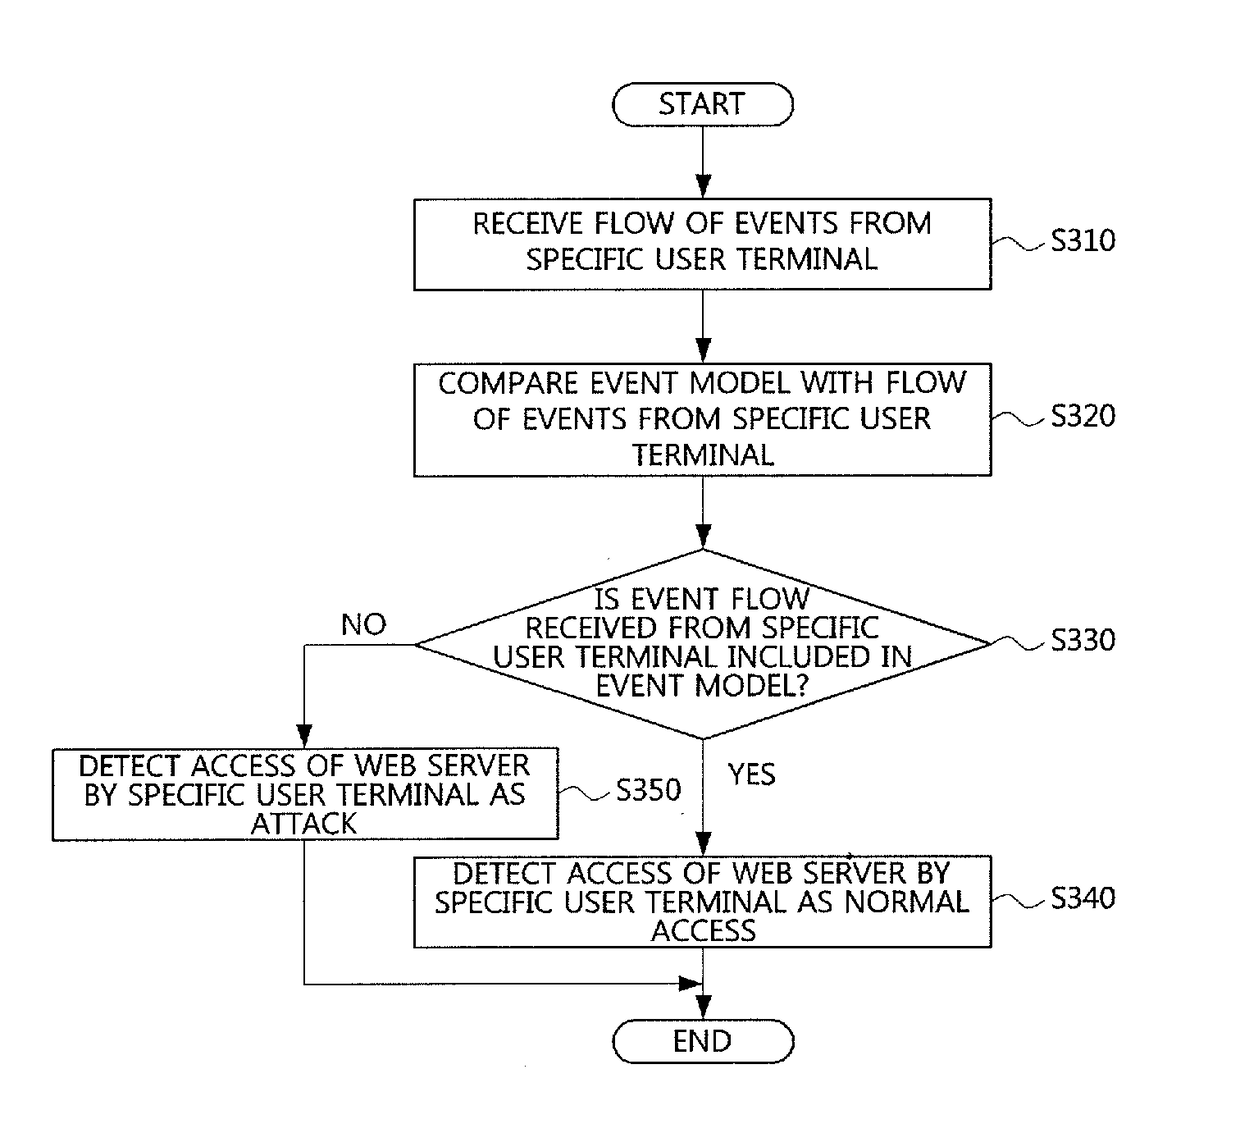 Device for detecting cyber attack based on event analysis and method thereof